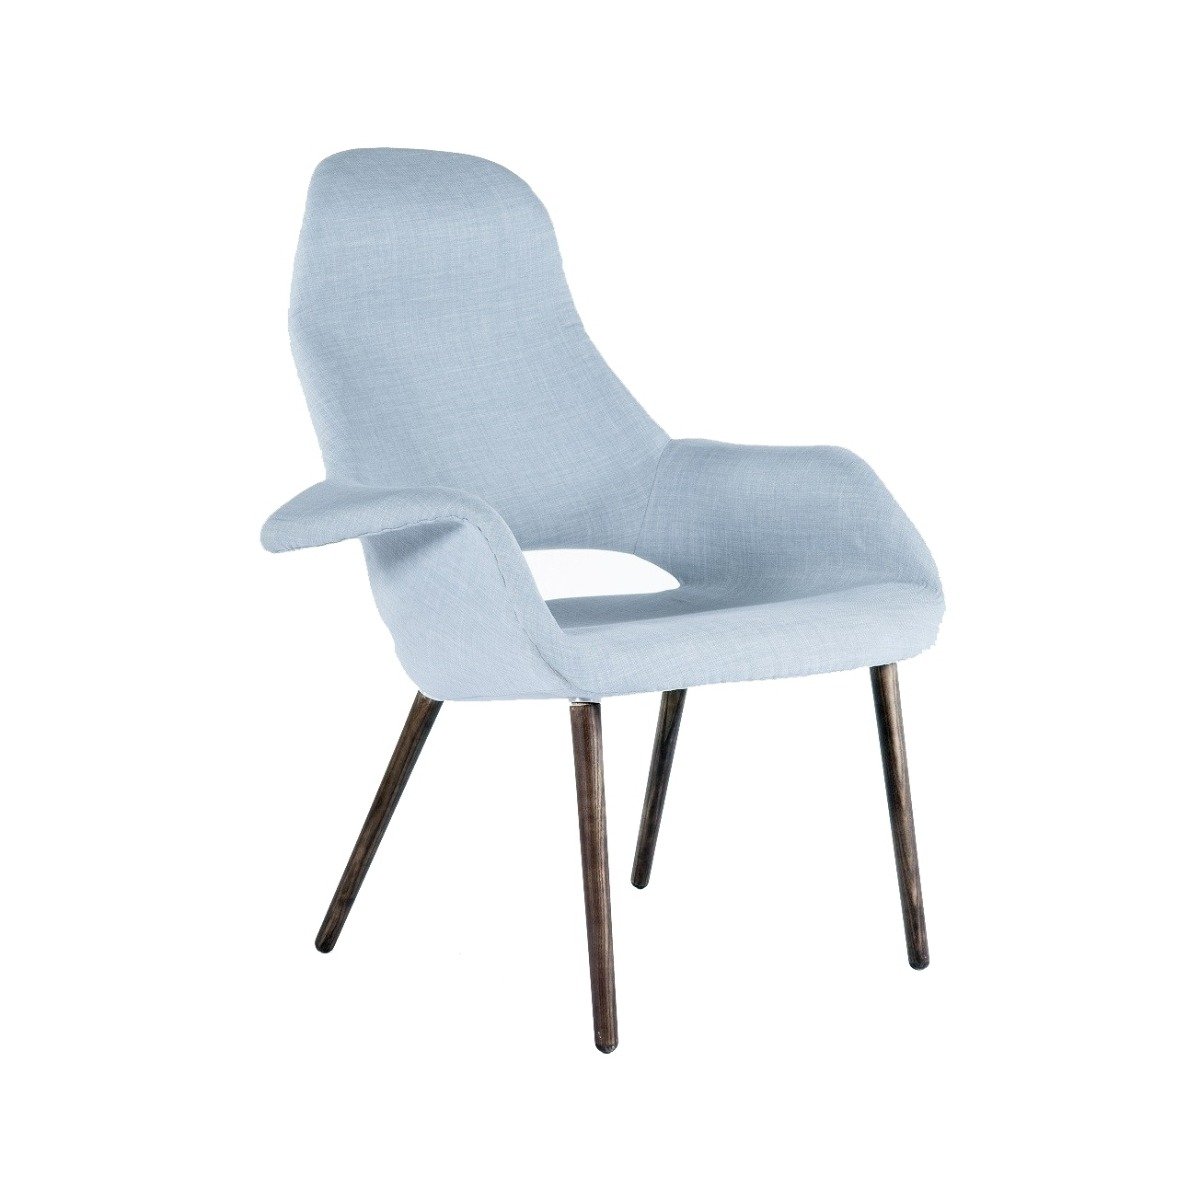 Salamanca Armchair Tall - Blue Furniture-Dining Room-Dining & Side Chairs